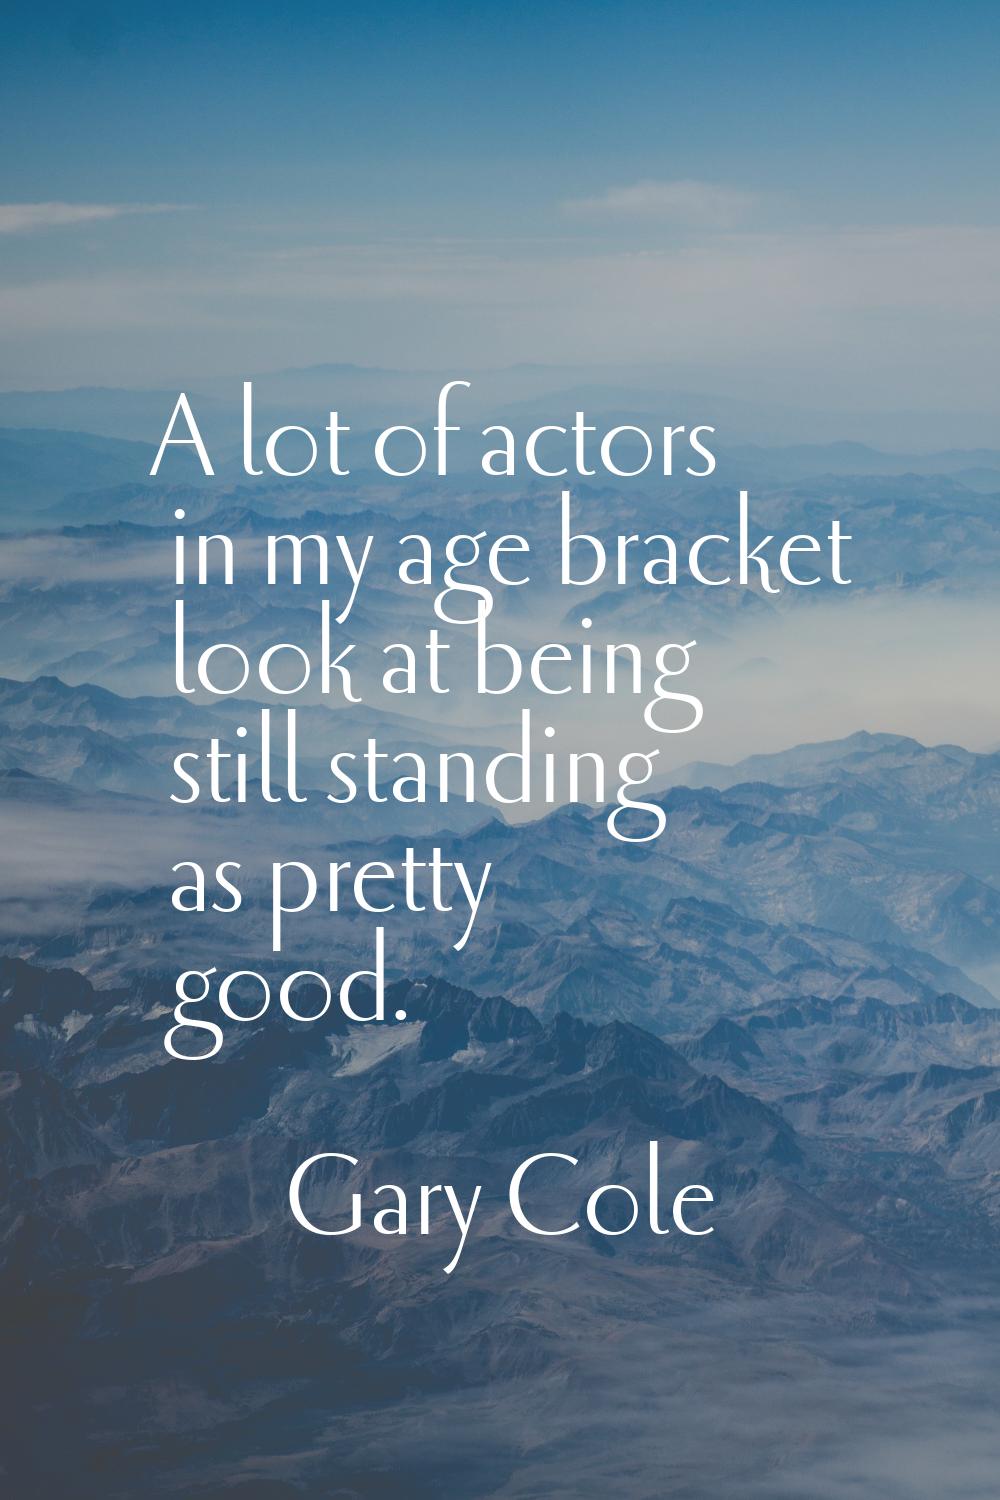 A lot of actors in my age bracket look at being still standing as pretty good.